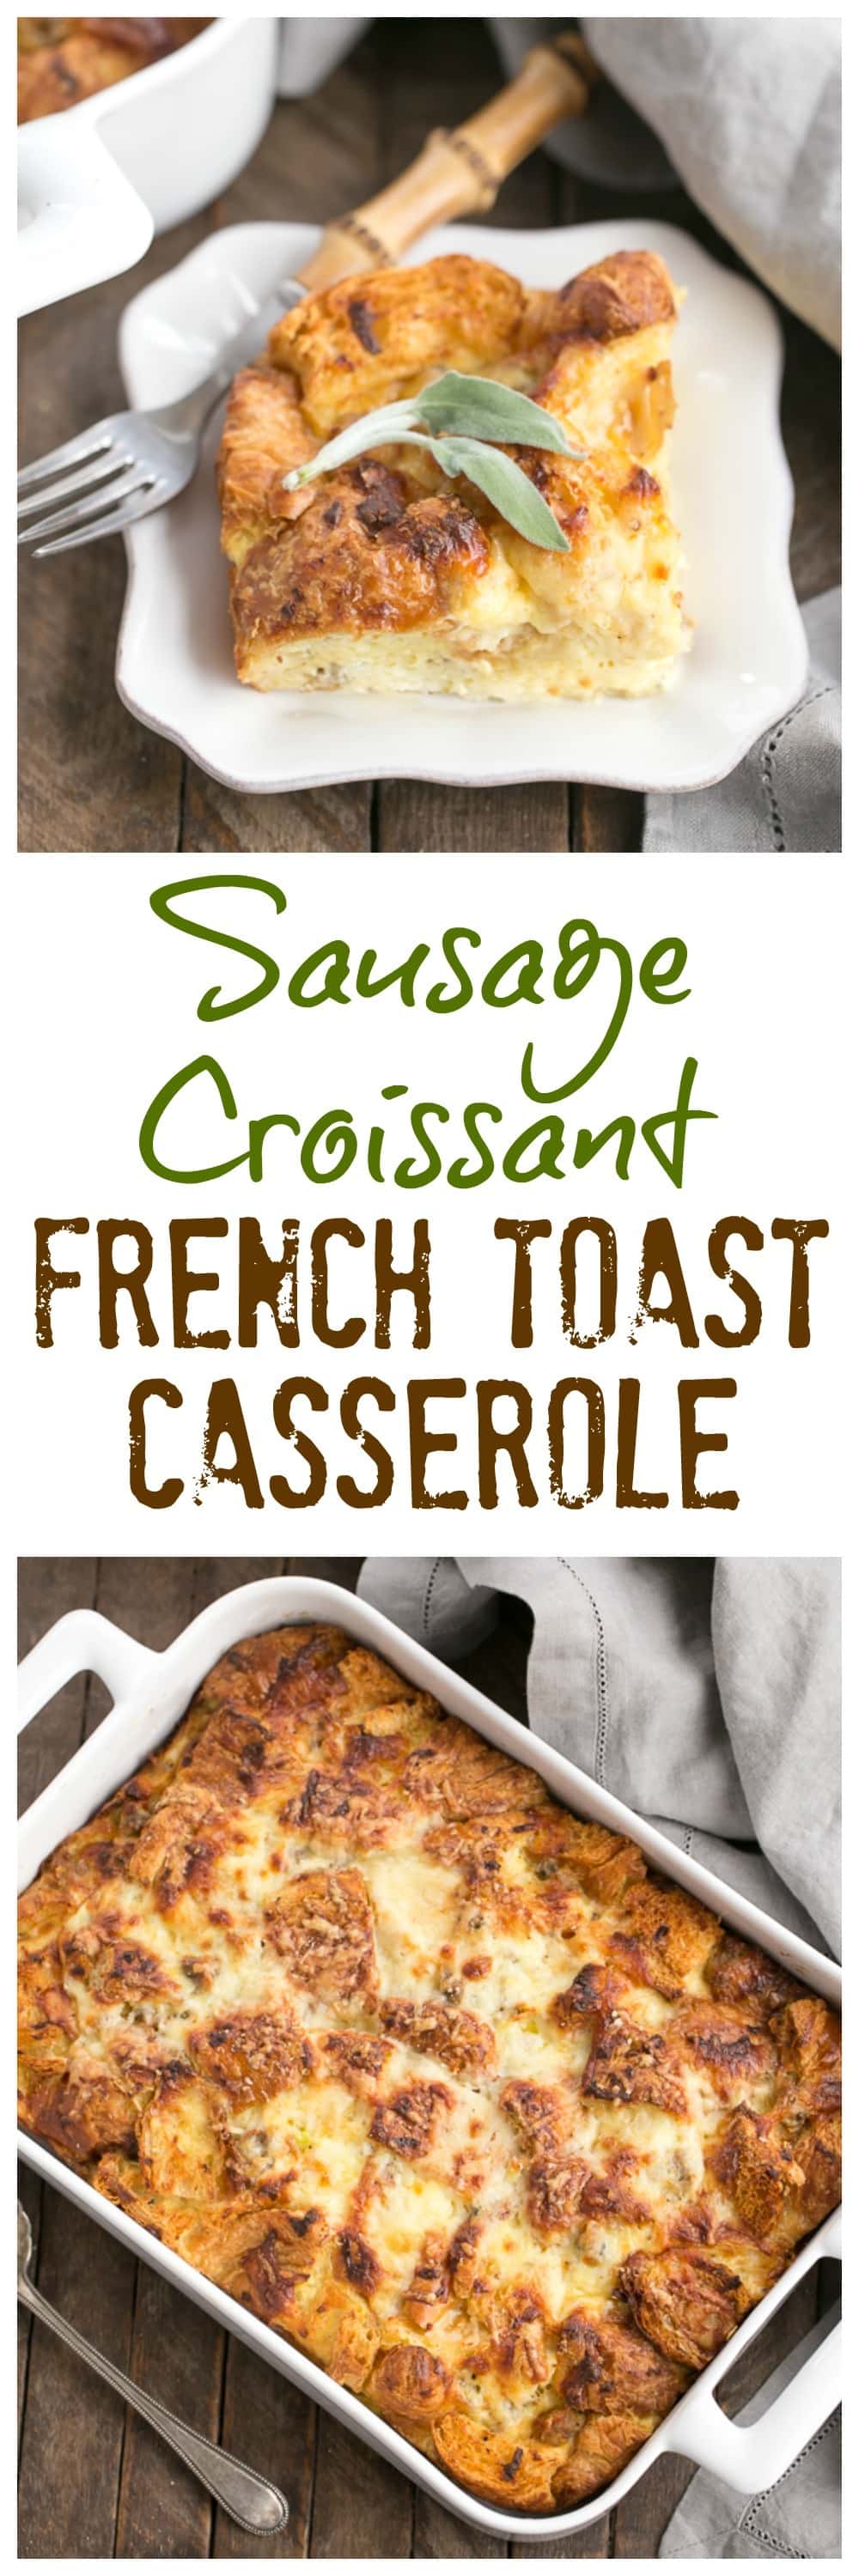 Sausage Croissant French Toast Casserole - Tender, buttery and full of flavor from sausage, herbs and Gruyere